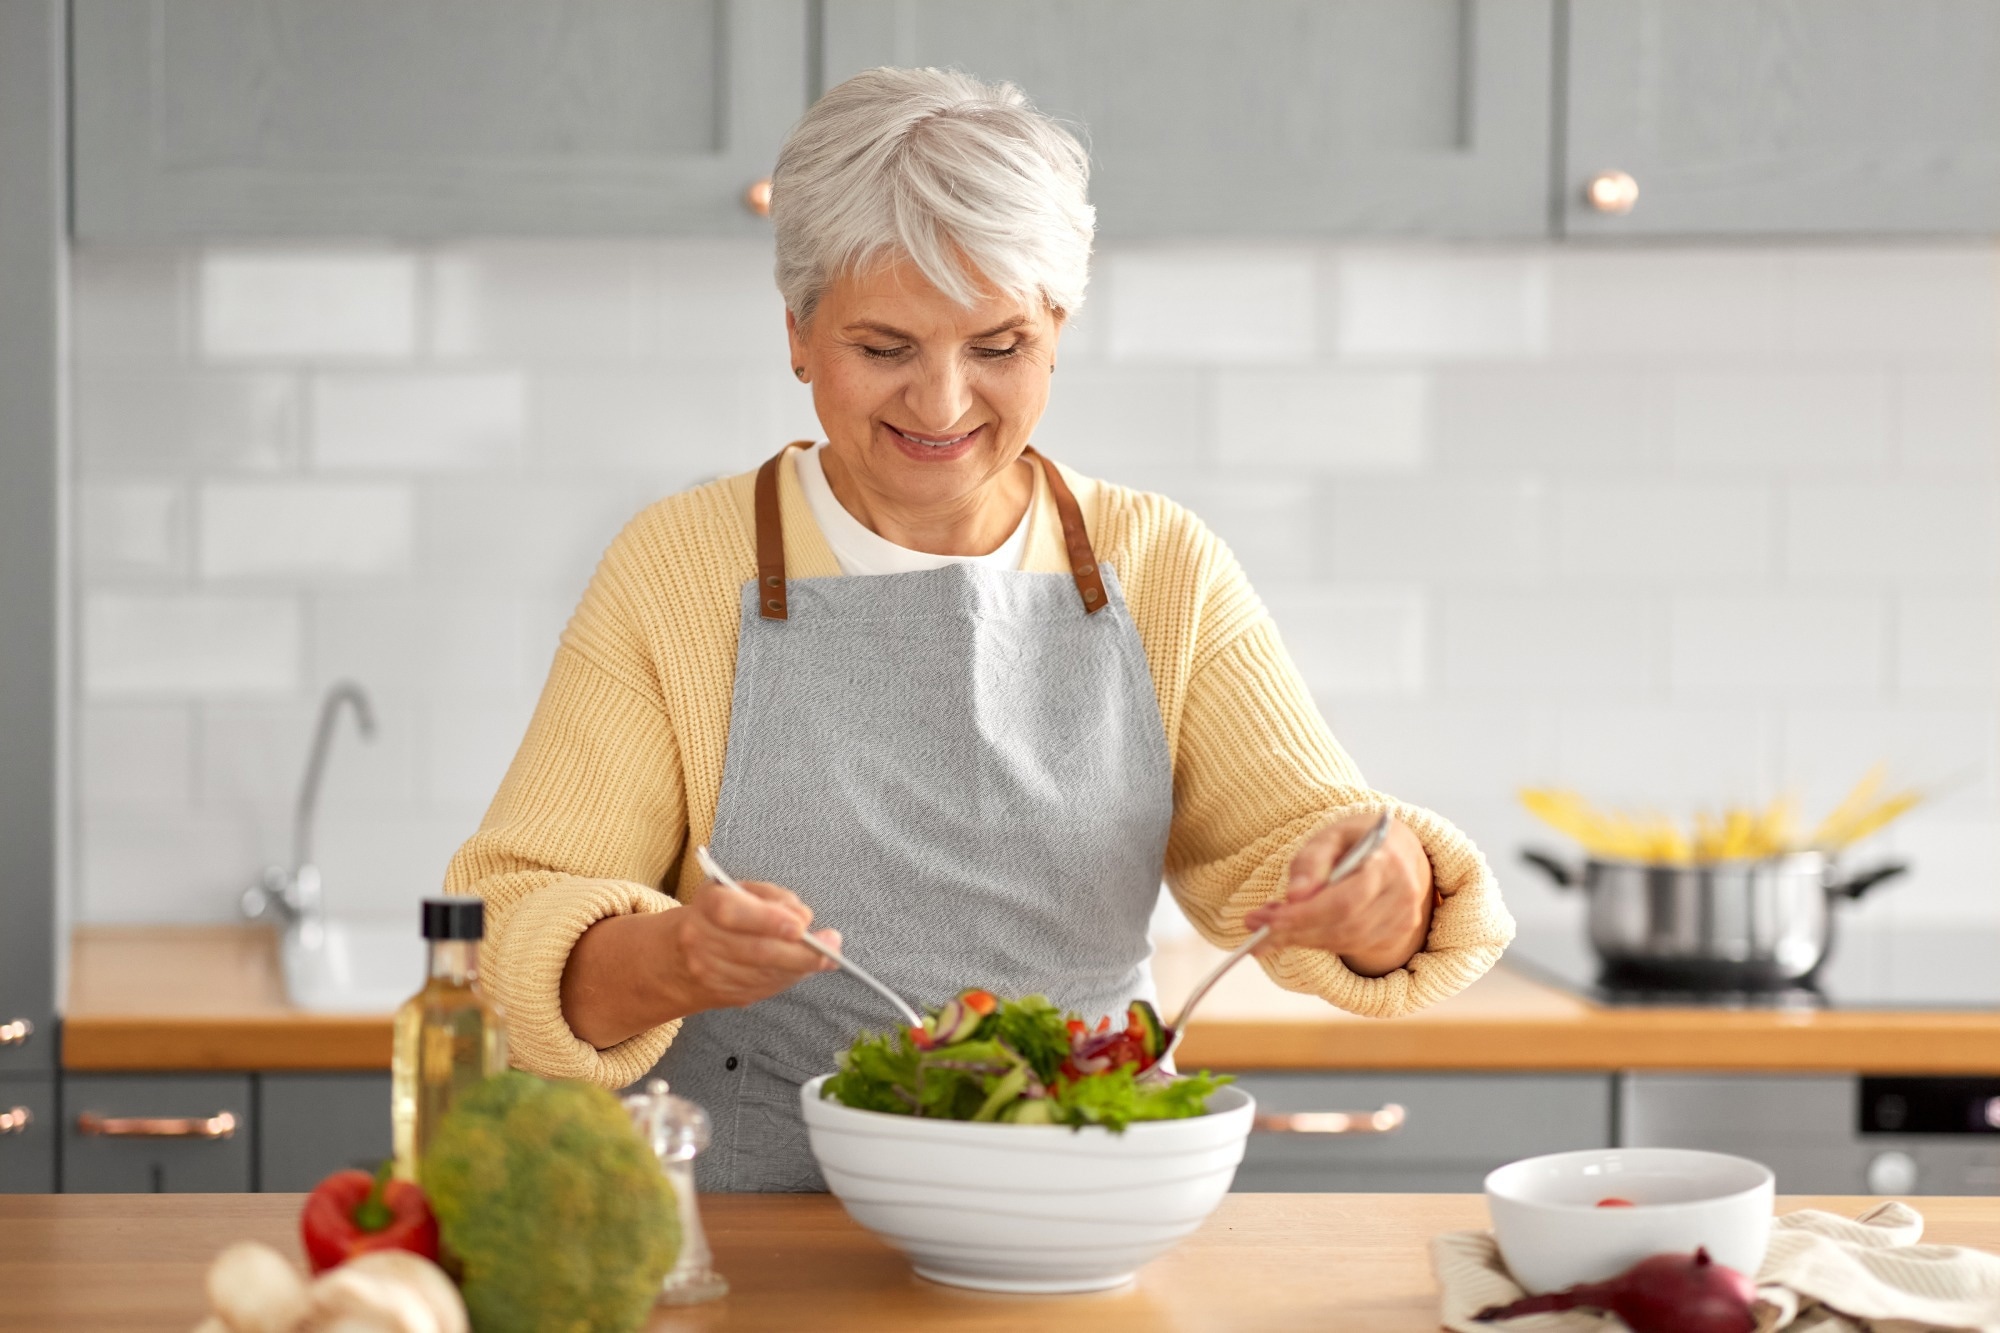 Study: Changes in Food Consumption in Postmenopausal Women during the COVID-19 Pandemic: A Longitudinal Study. Image Credit: GroundPicture/Shutterstock.com